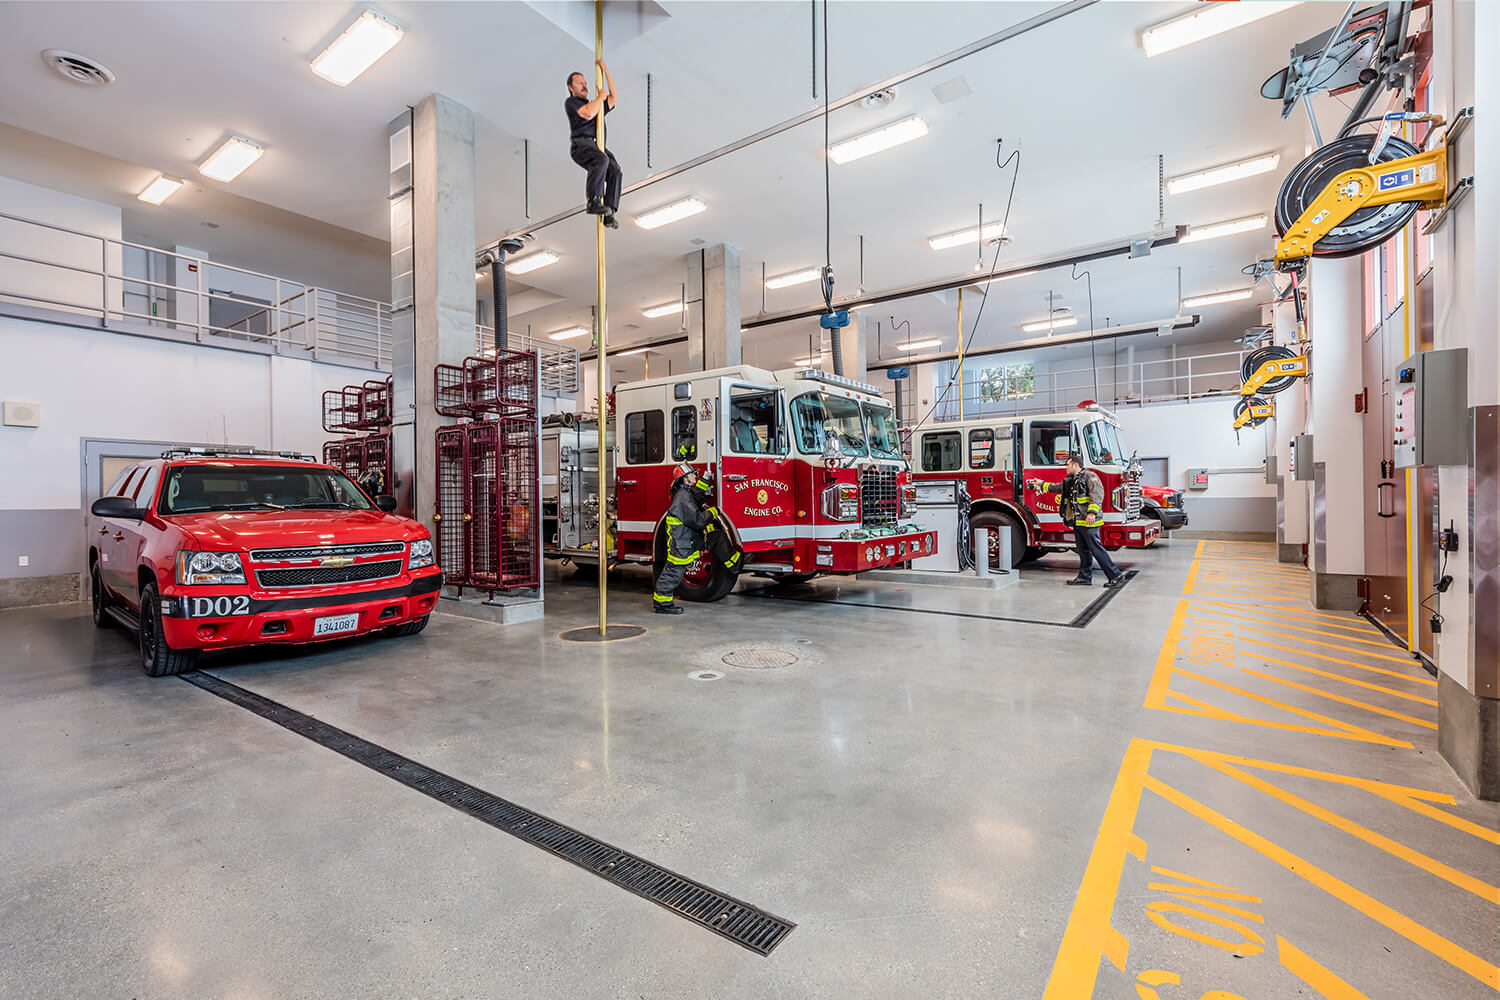 Now You Can Buy An App That is Really Made For fire station